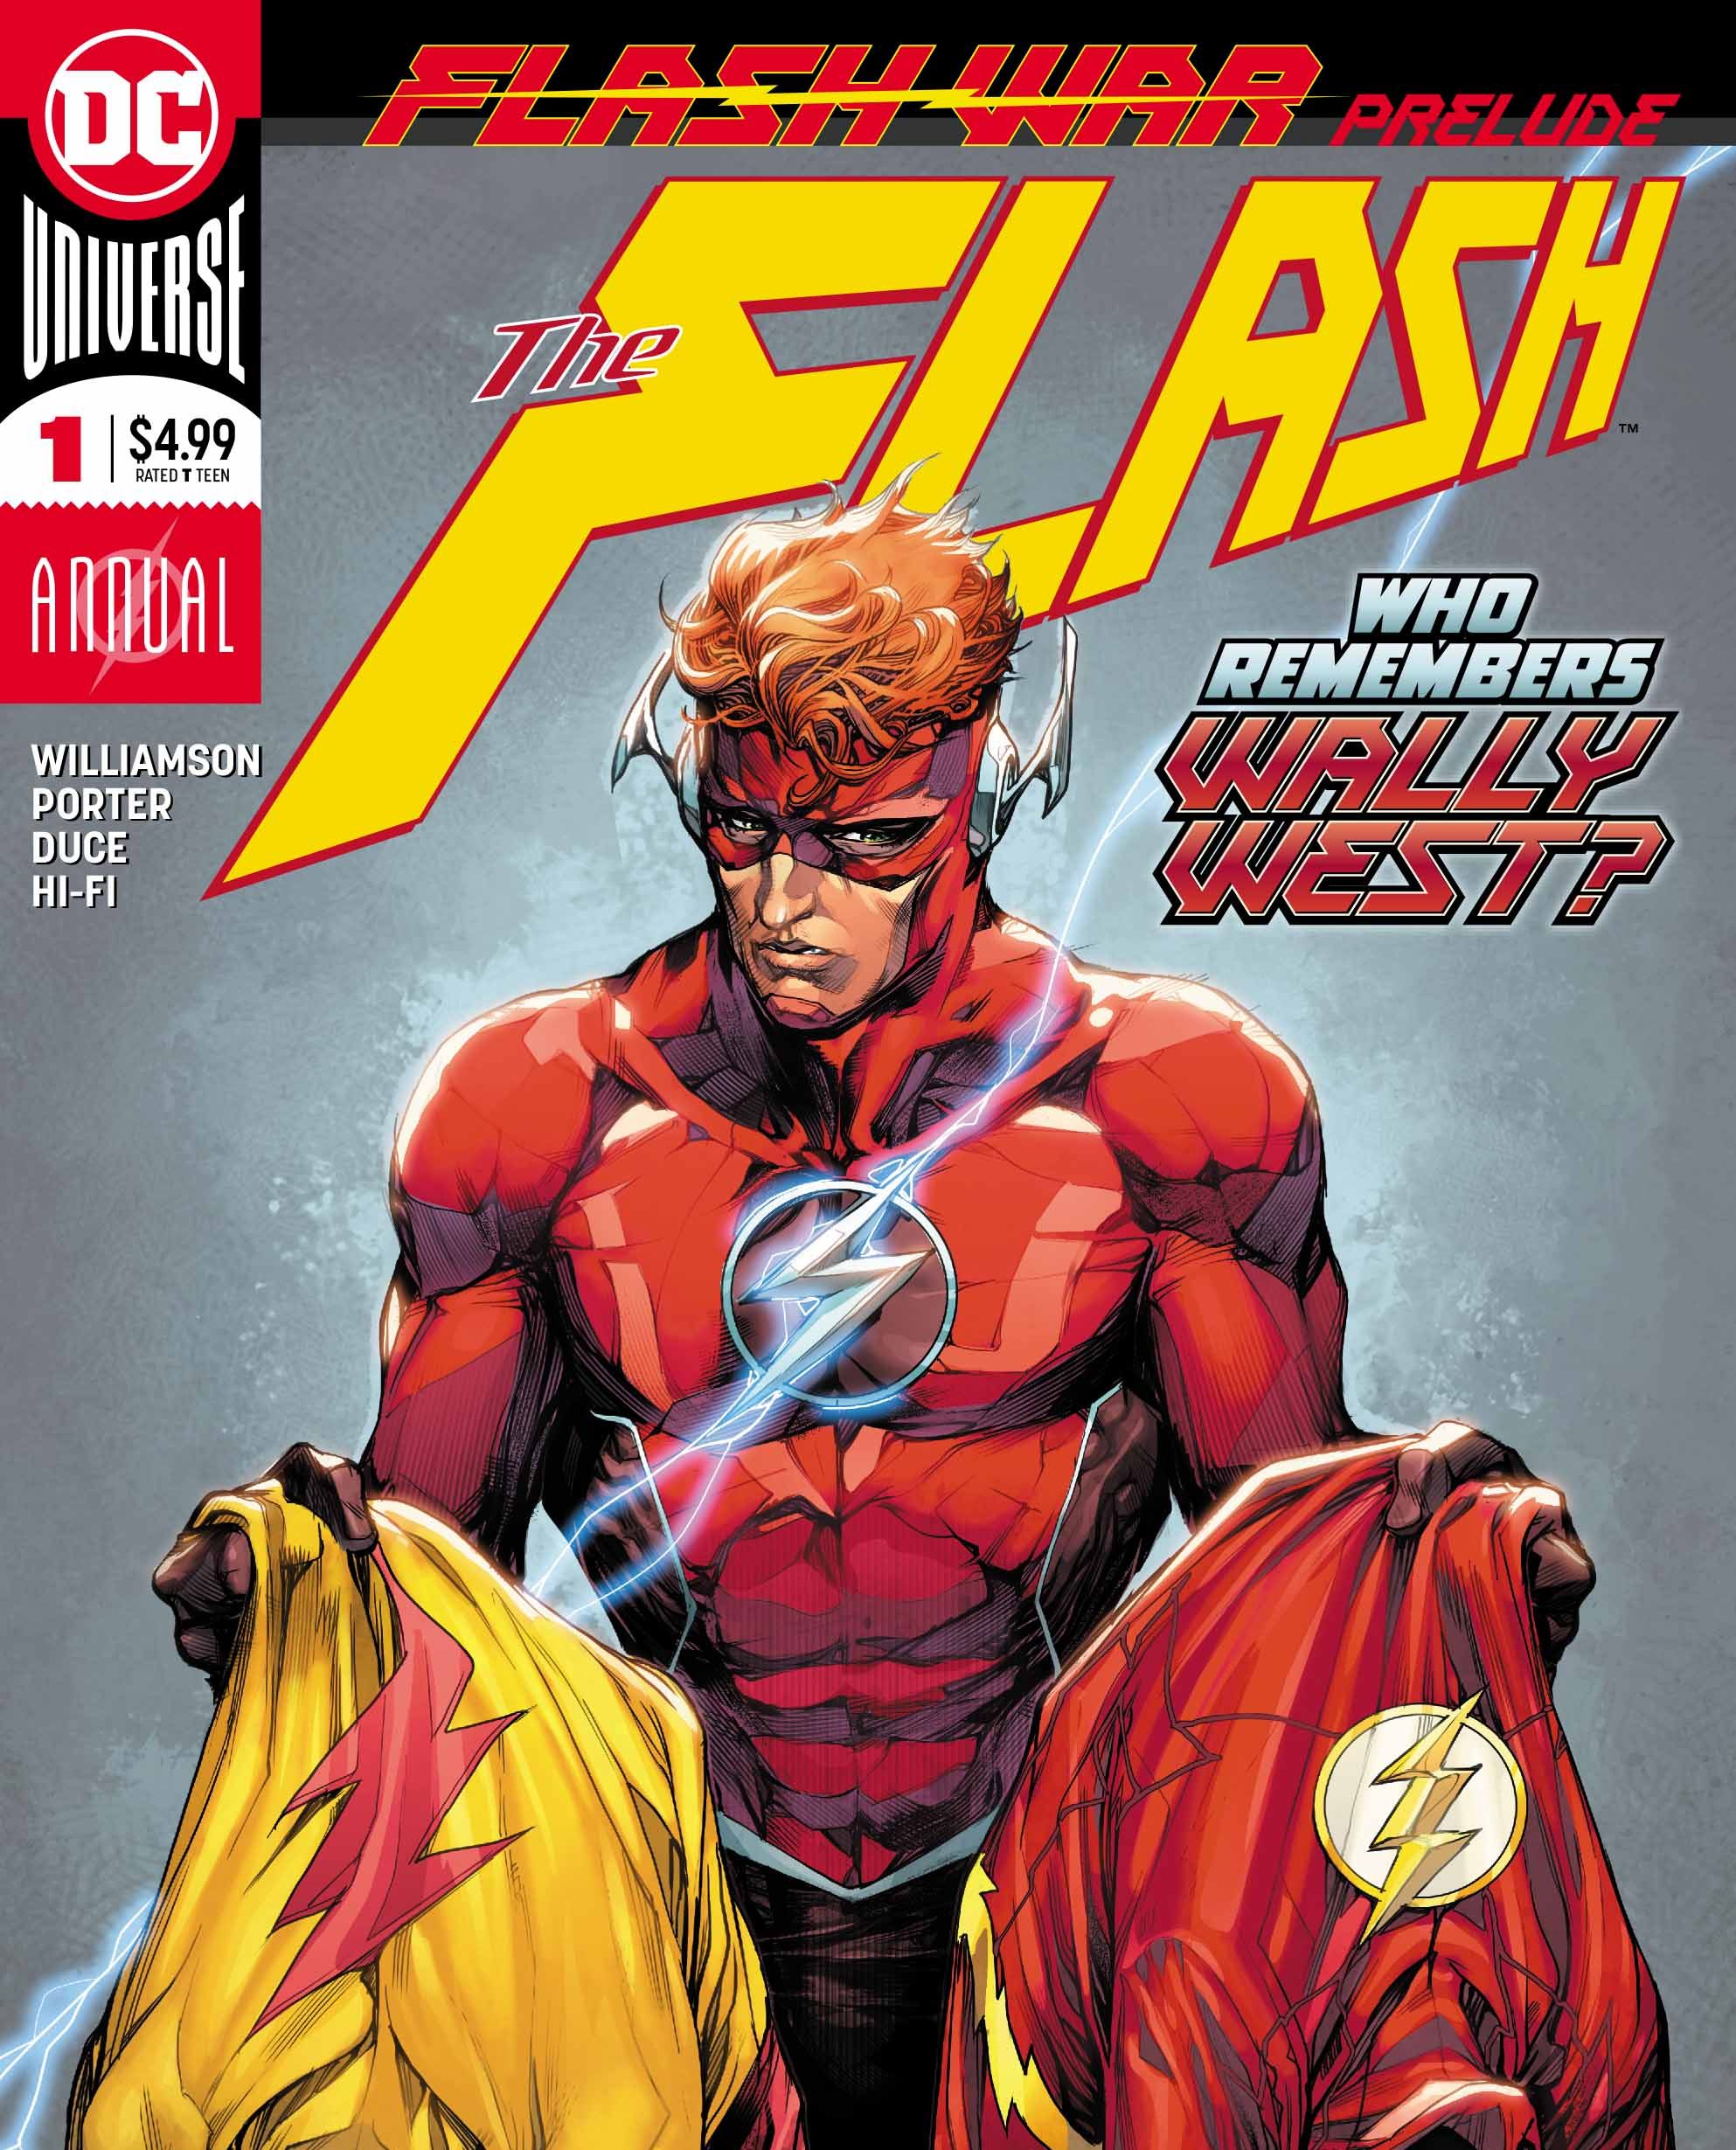 The Flash Annual #1 review: Best Flash story since 2005